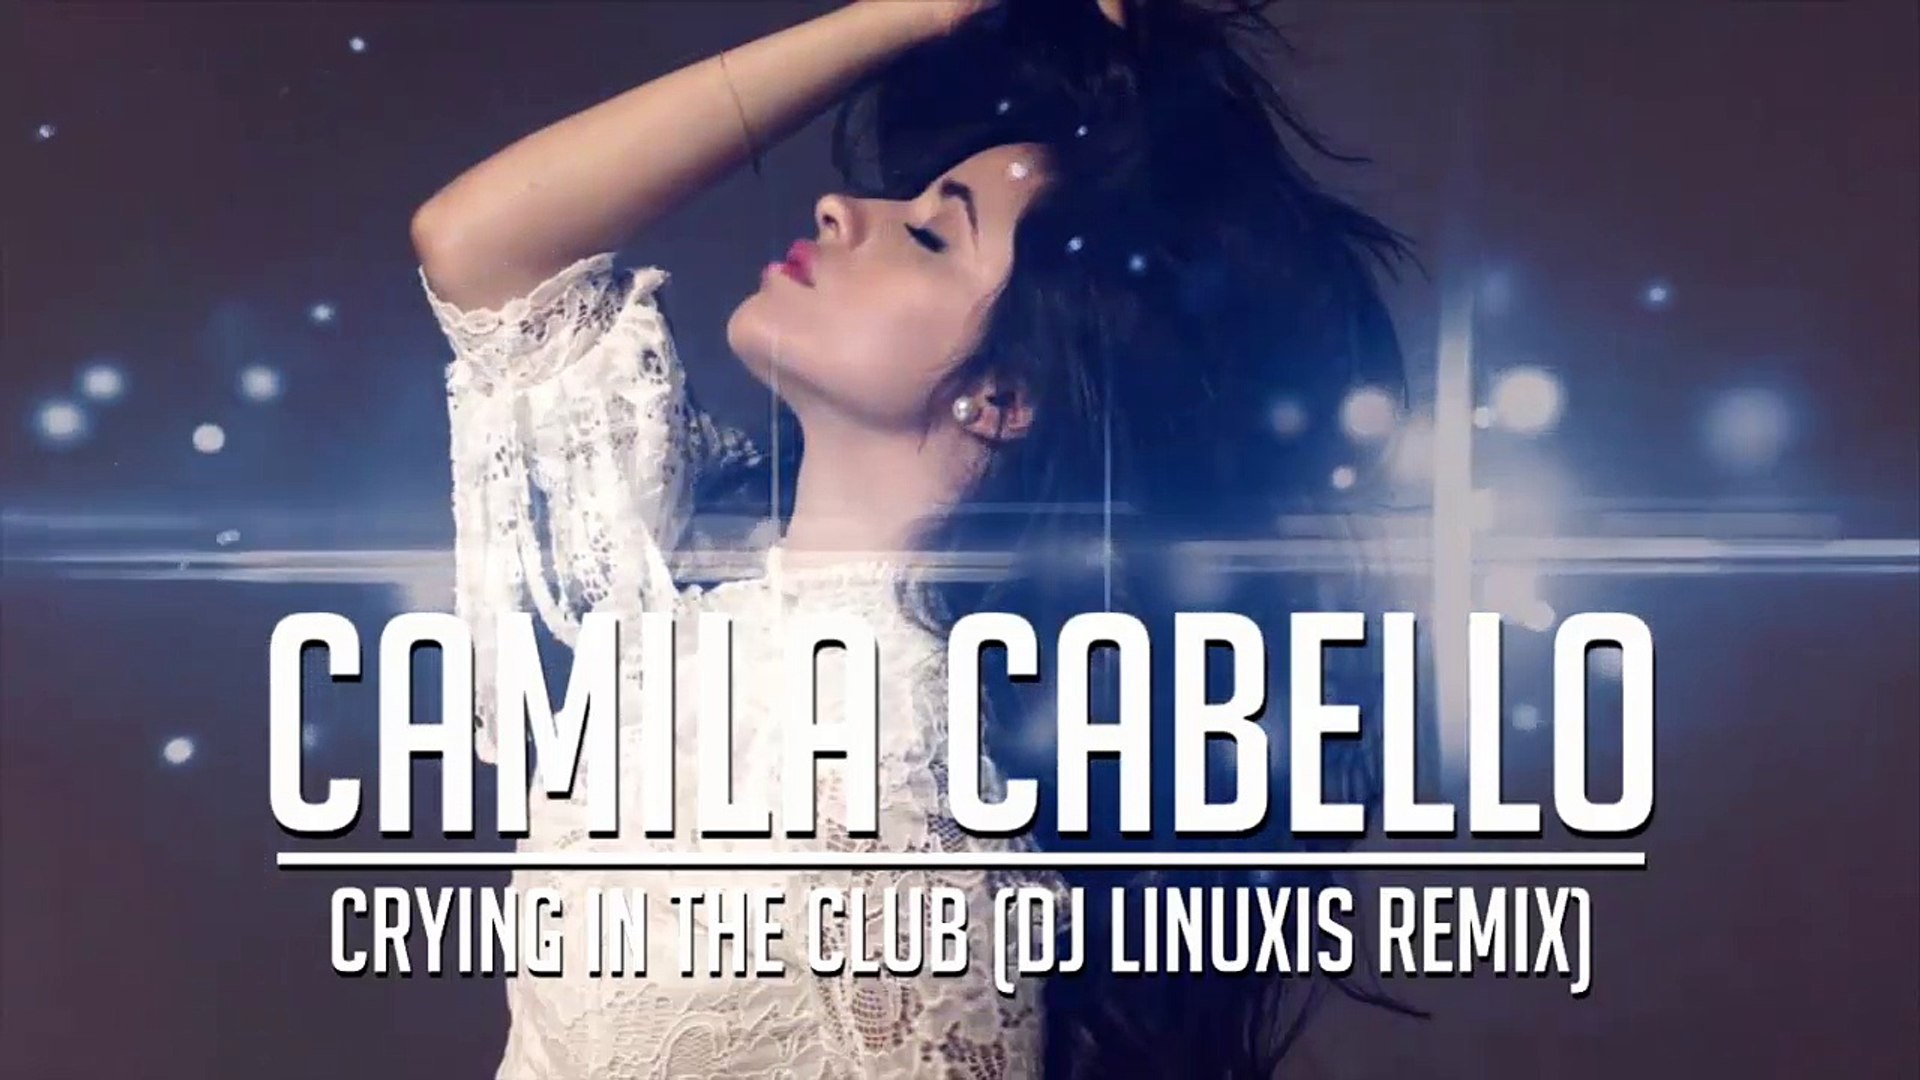 Camila Cabello - Crying in the Club remix - video Dailymotion